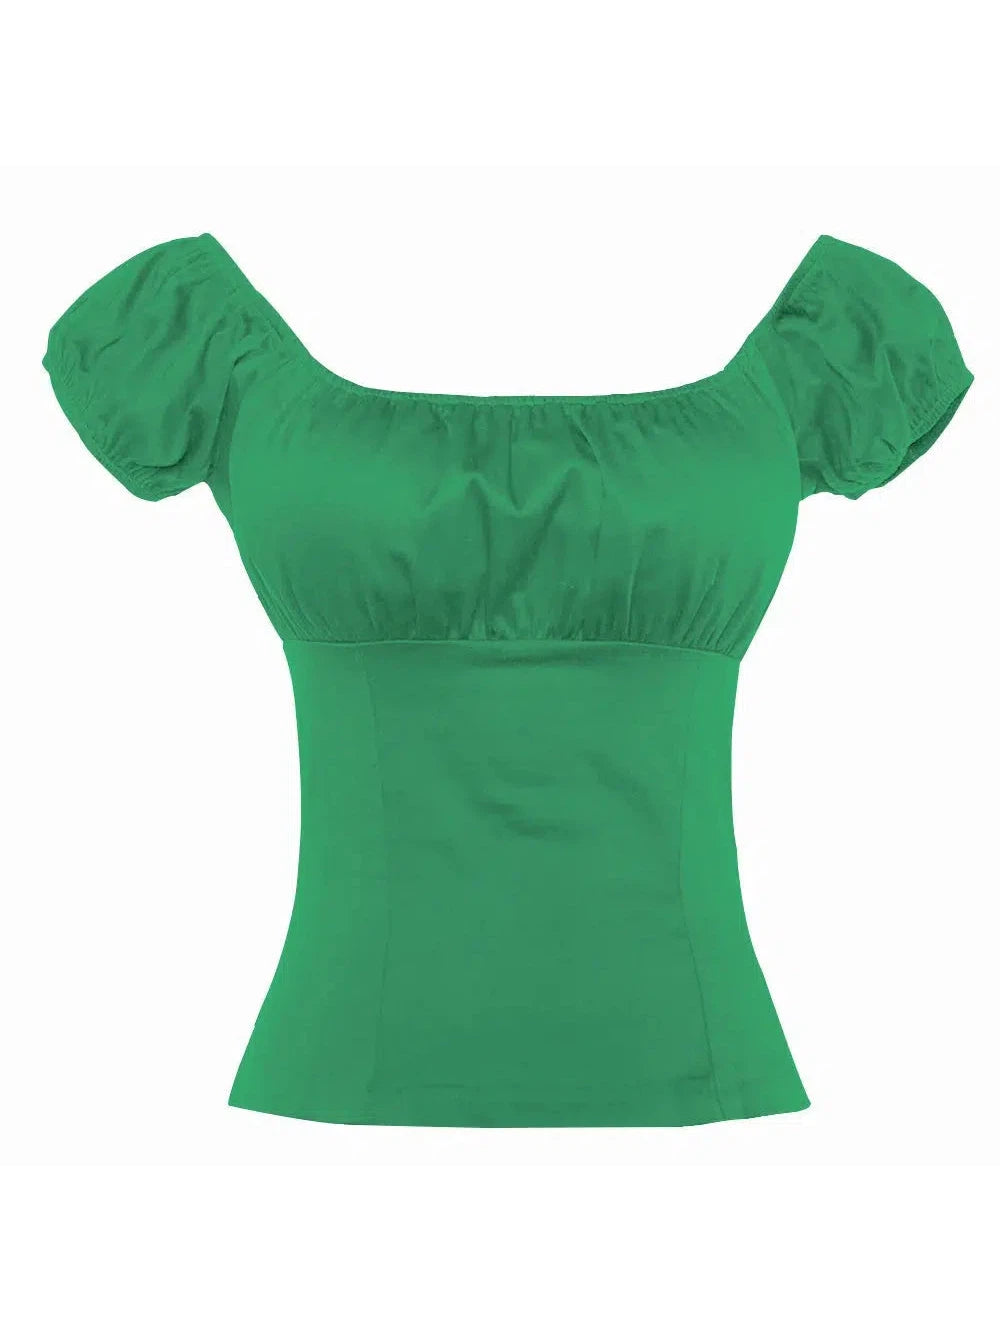 Green Peasant Style Top